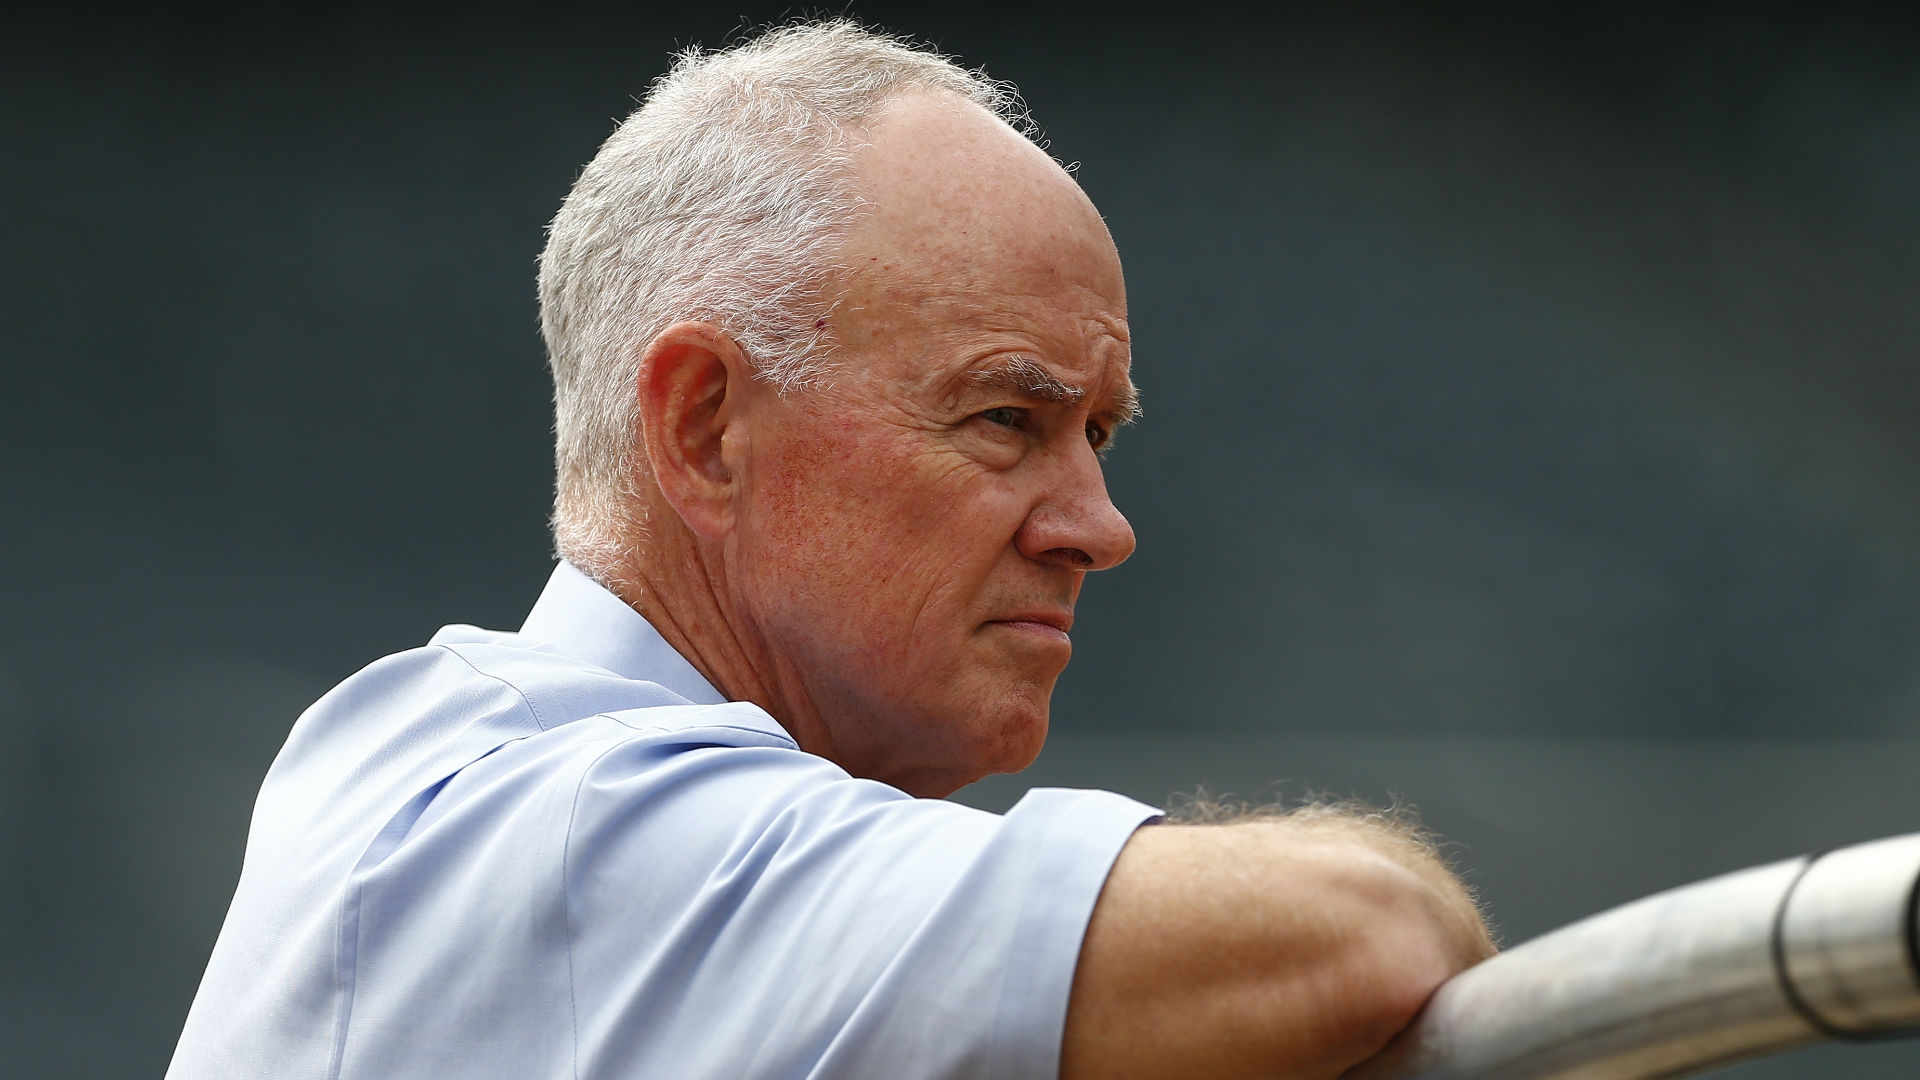 Mets GM Sandy Alderson diagnosed with treatable form of cancer